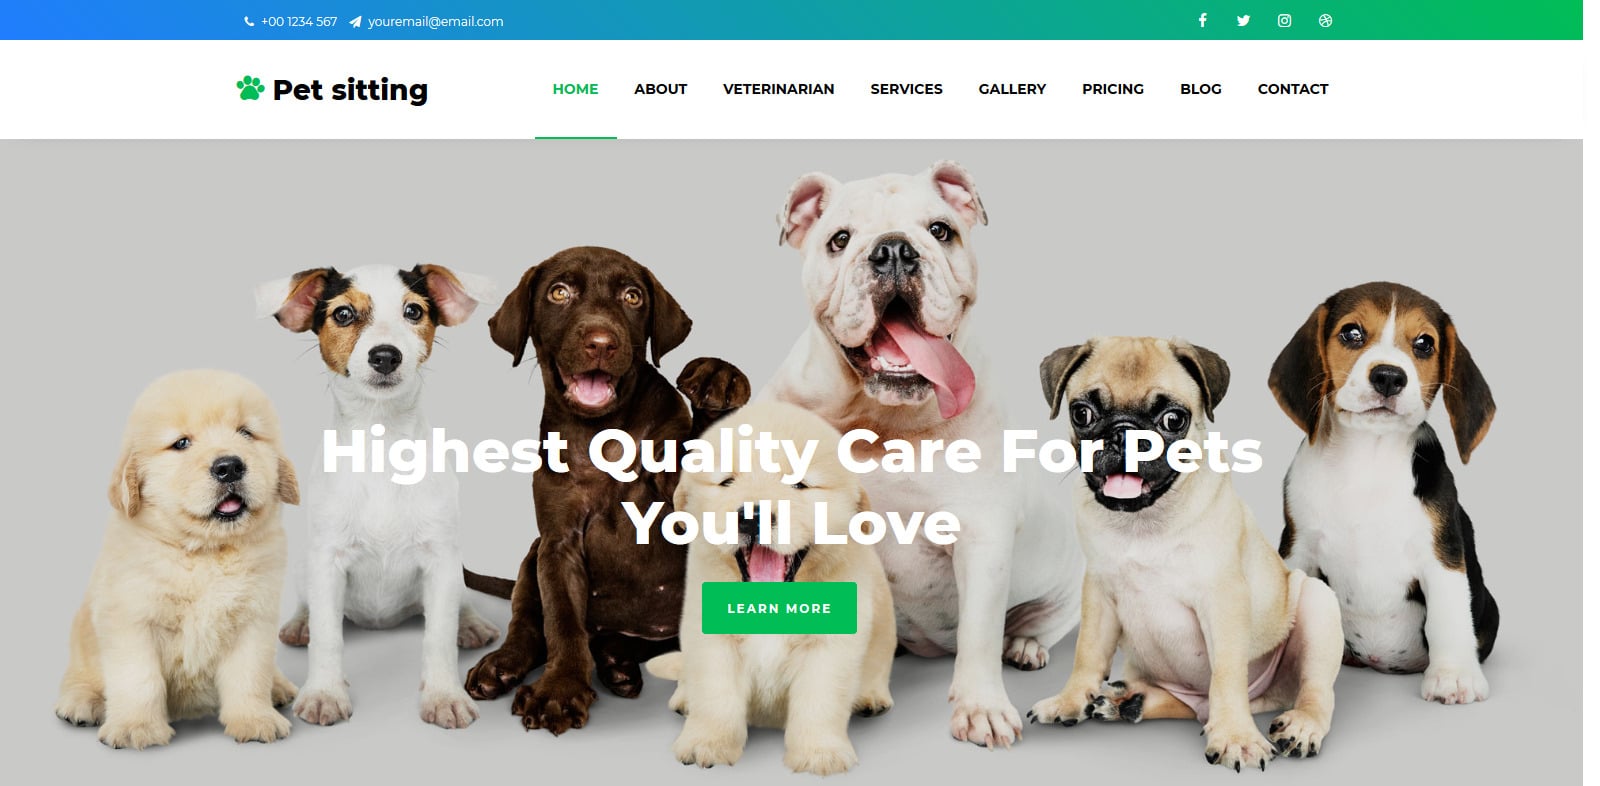 35+ Free Animal & Pets Website Template For Animal Based Sites